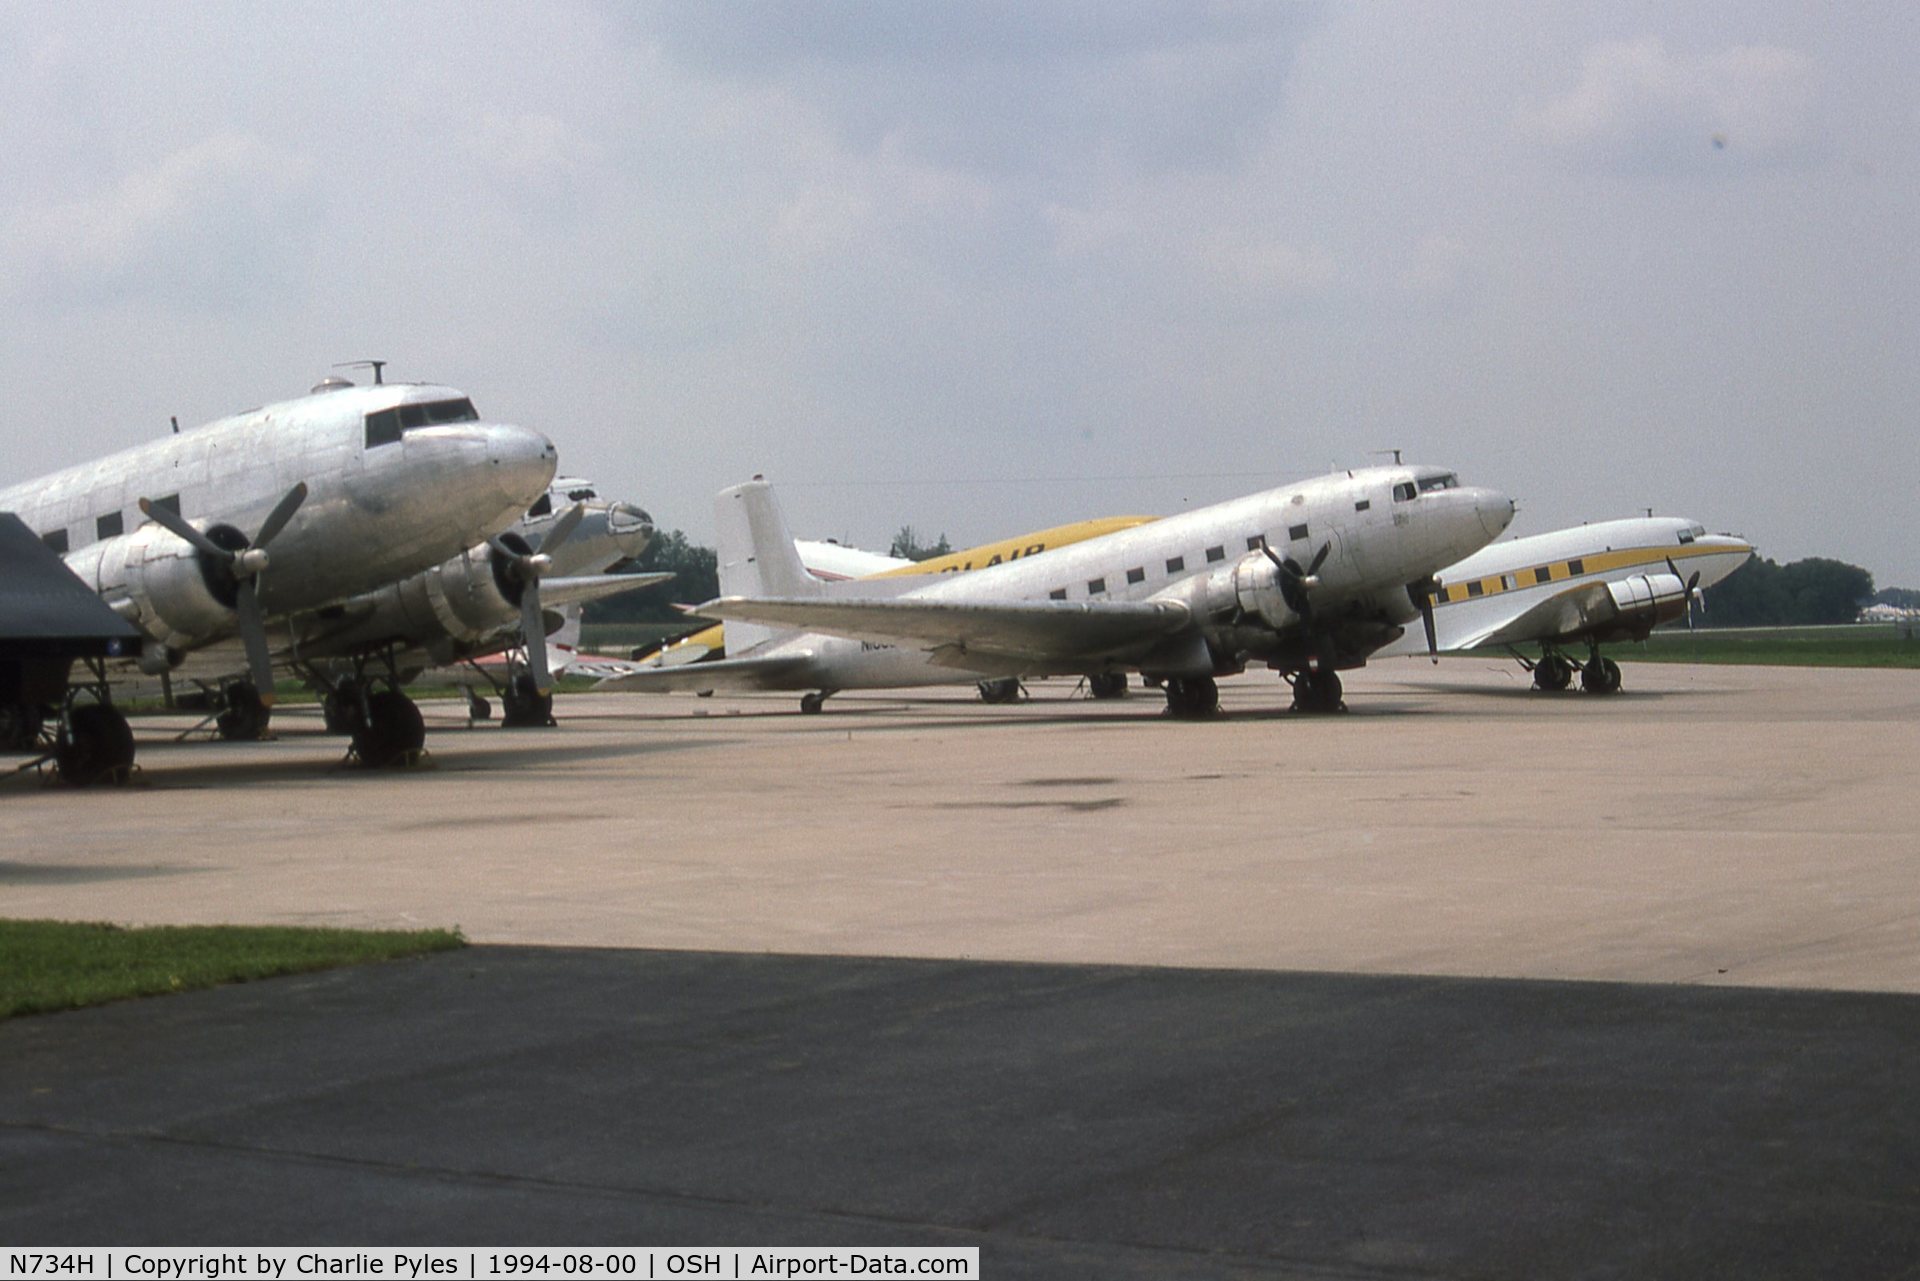 N734H, 1942 Douglas DC-3 (C-47-DL) C/N 4727, N734H is the yellow airplane in the background on this Basler Ramp in 1994. The yellow/black airplane behind it is N23SA,  the Polair Conroy Tri-Turbo-Three was a Douglas DC-3 fitted with three Pratt & Whitney Canada PT6A turbop